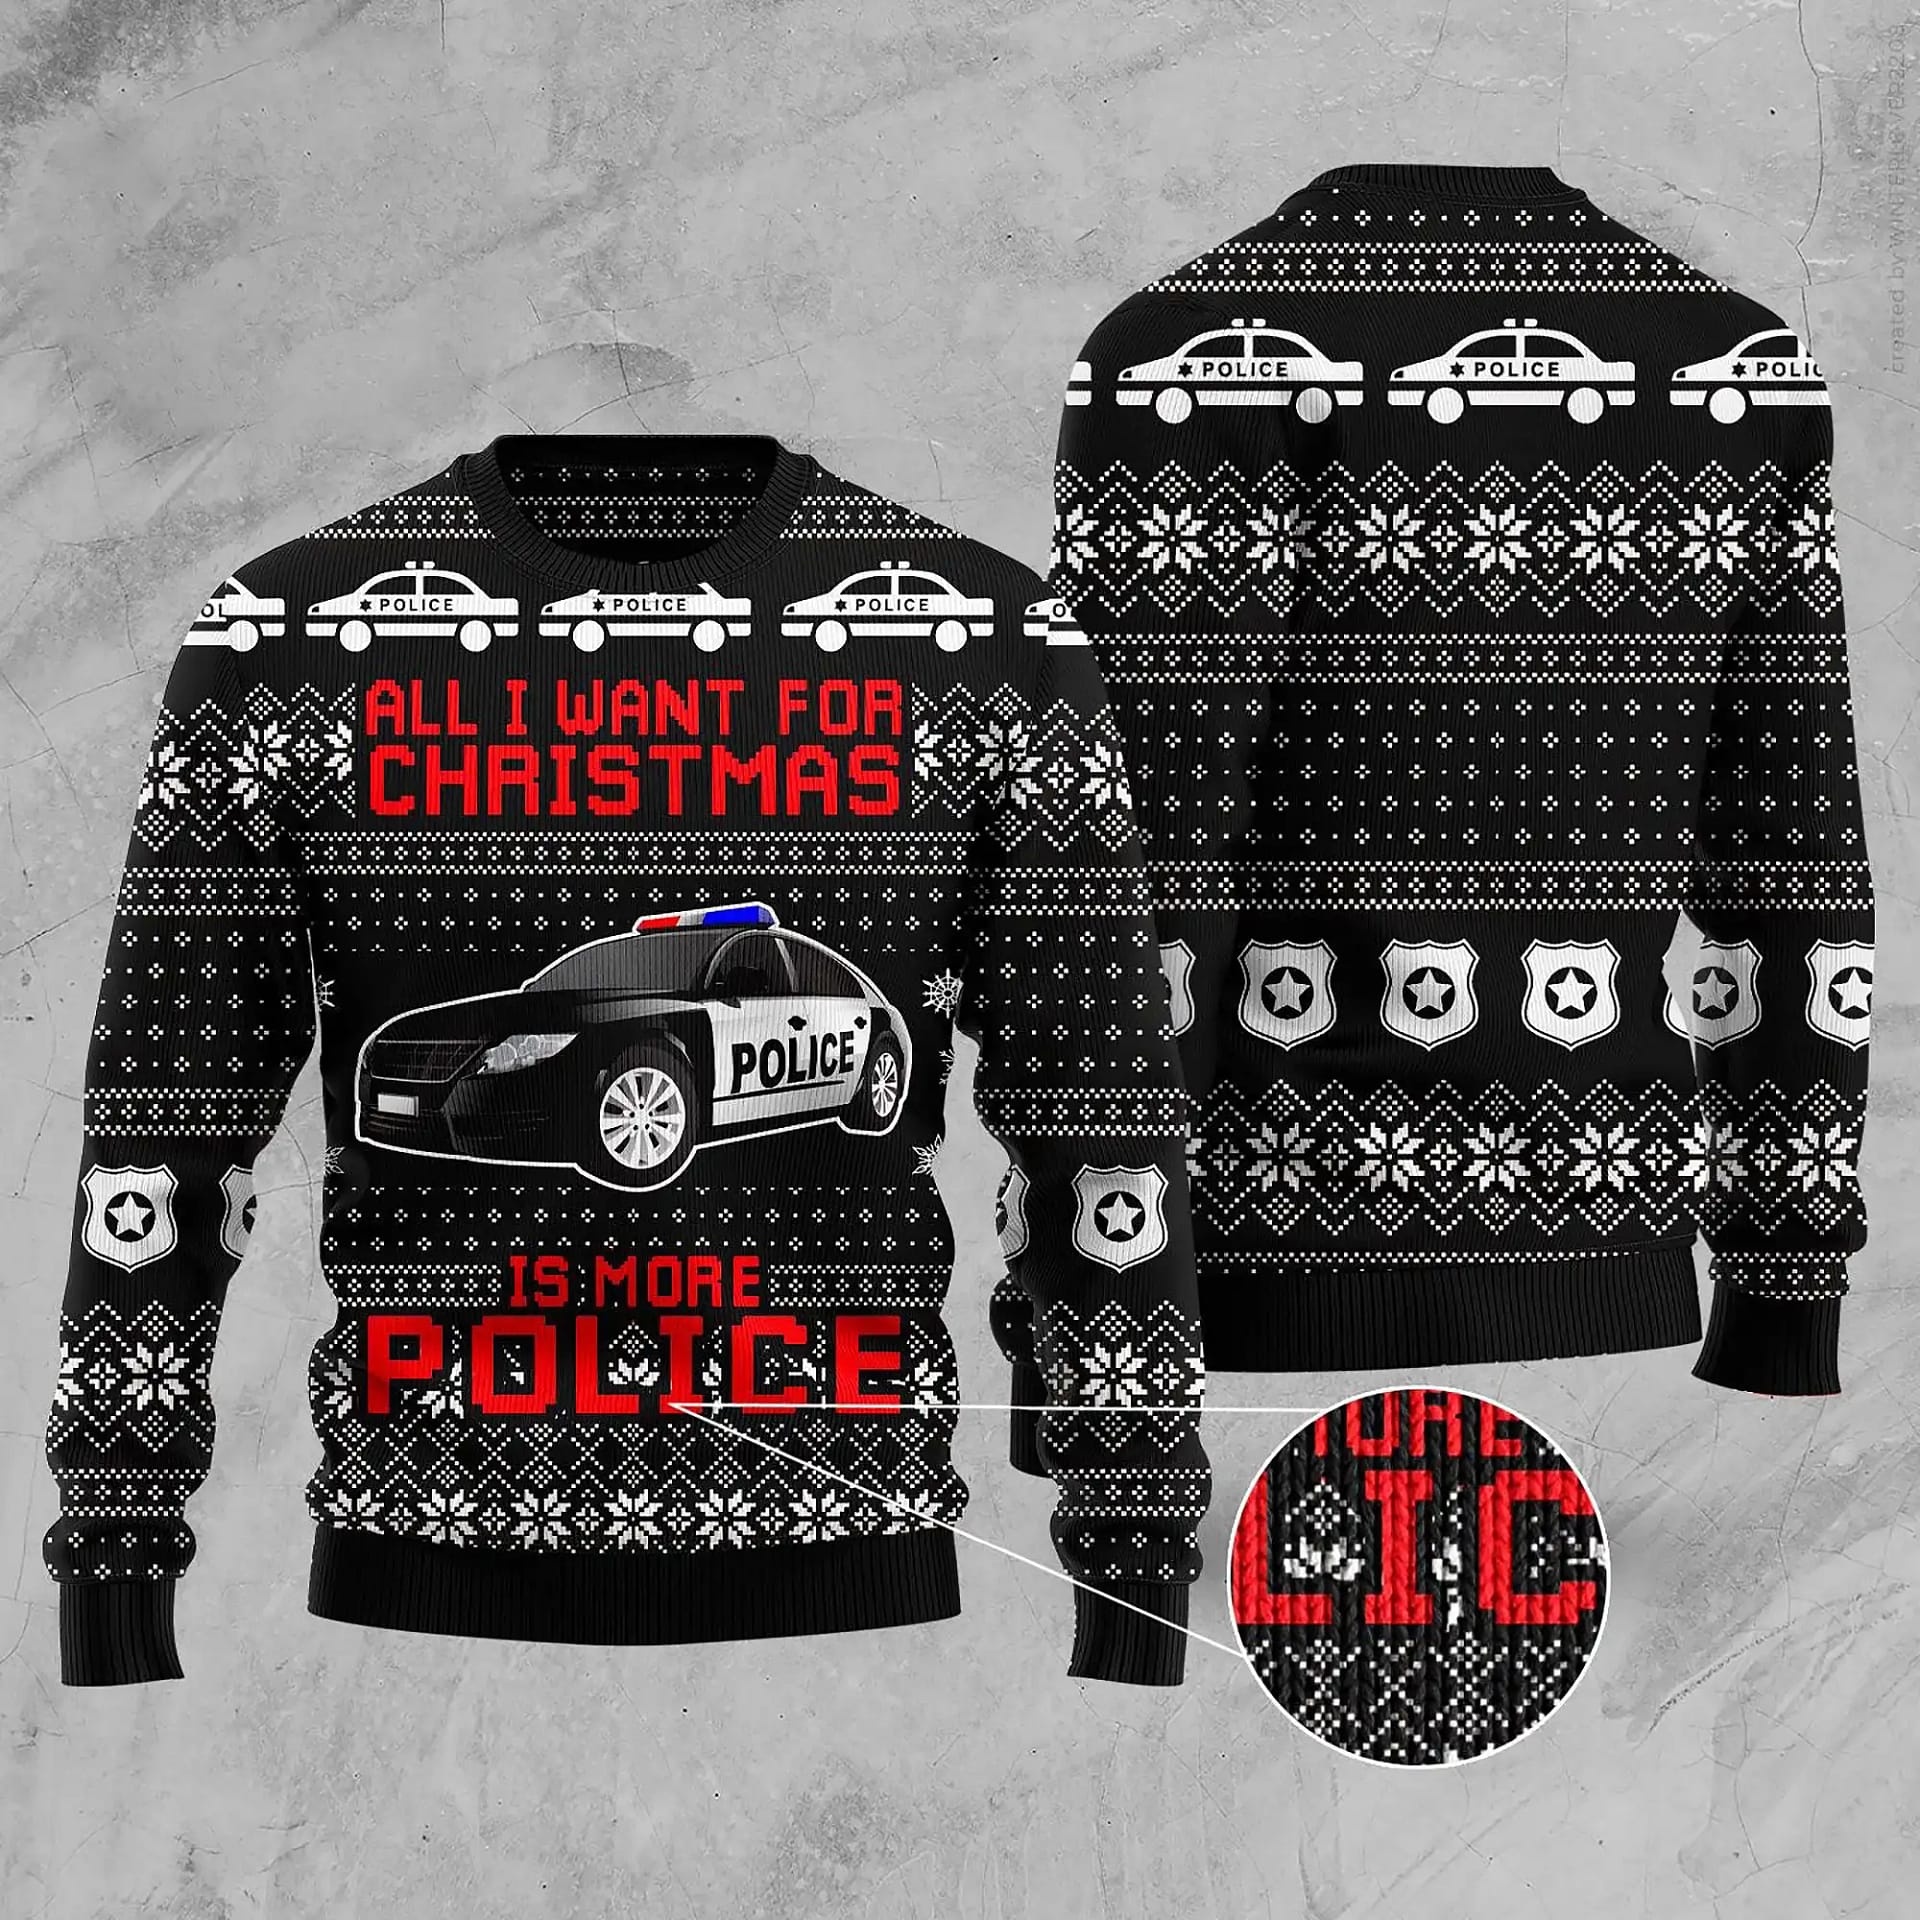 All I Want For Is More Police Knitting Xmas Best Holiday Gifts Ugly Sweater